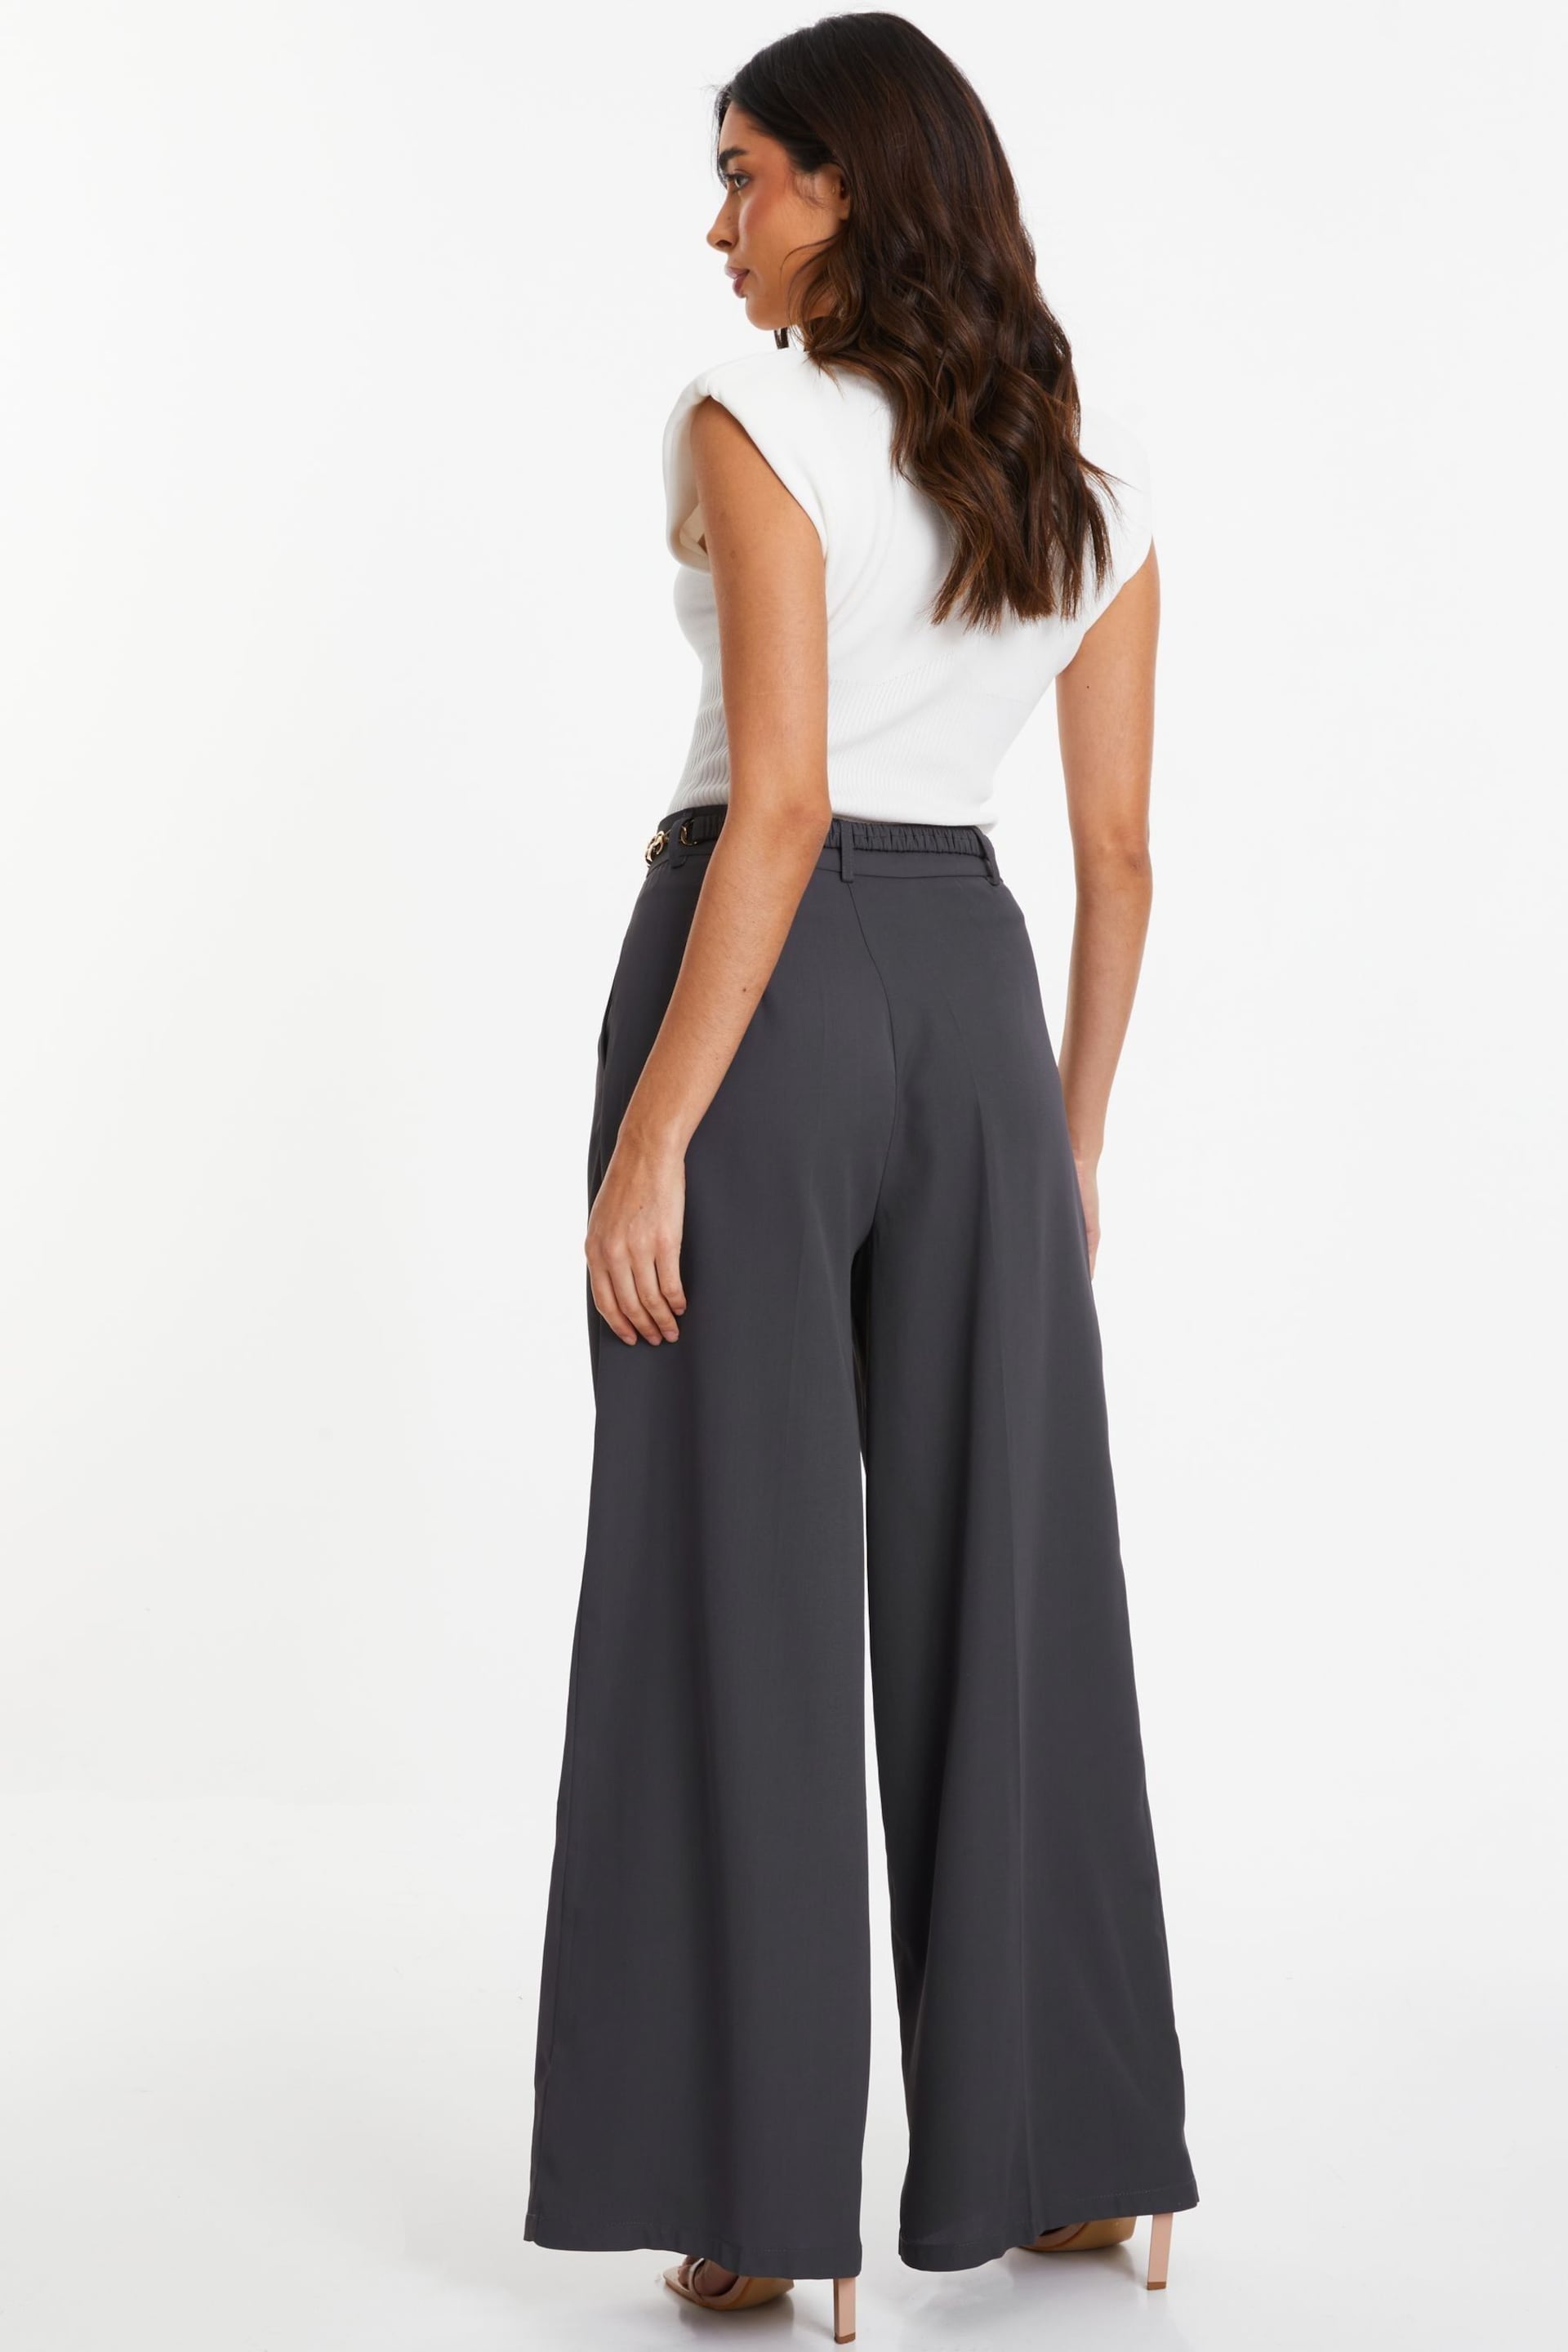 Quiz Grey Woven Wide Leg Trousers with Brown Chain Belt - Image 2 of 4